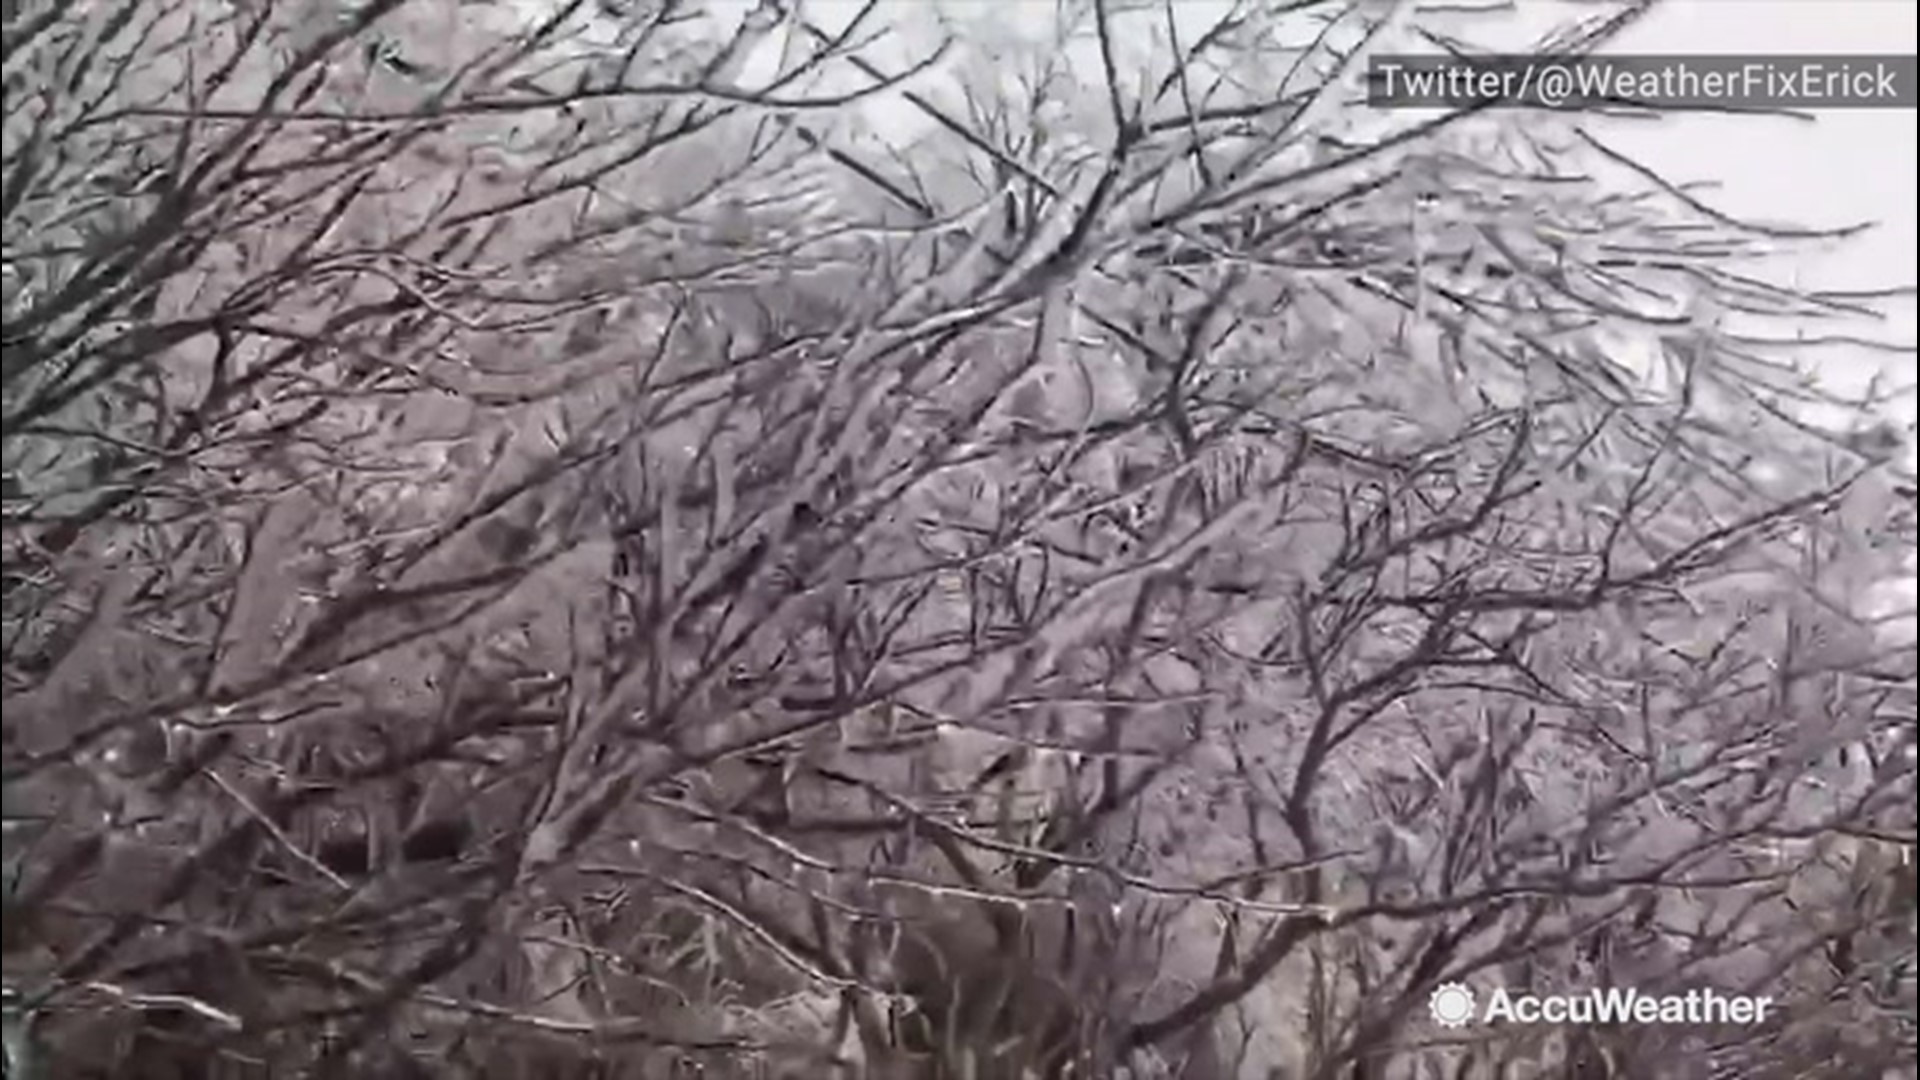 There's some spectacular scenery on top of Savage Mountain in western Maryland on Dec. 2, as icy trees are blown by gusts of wind.